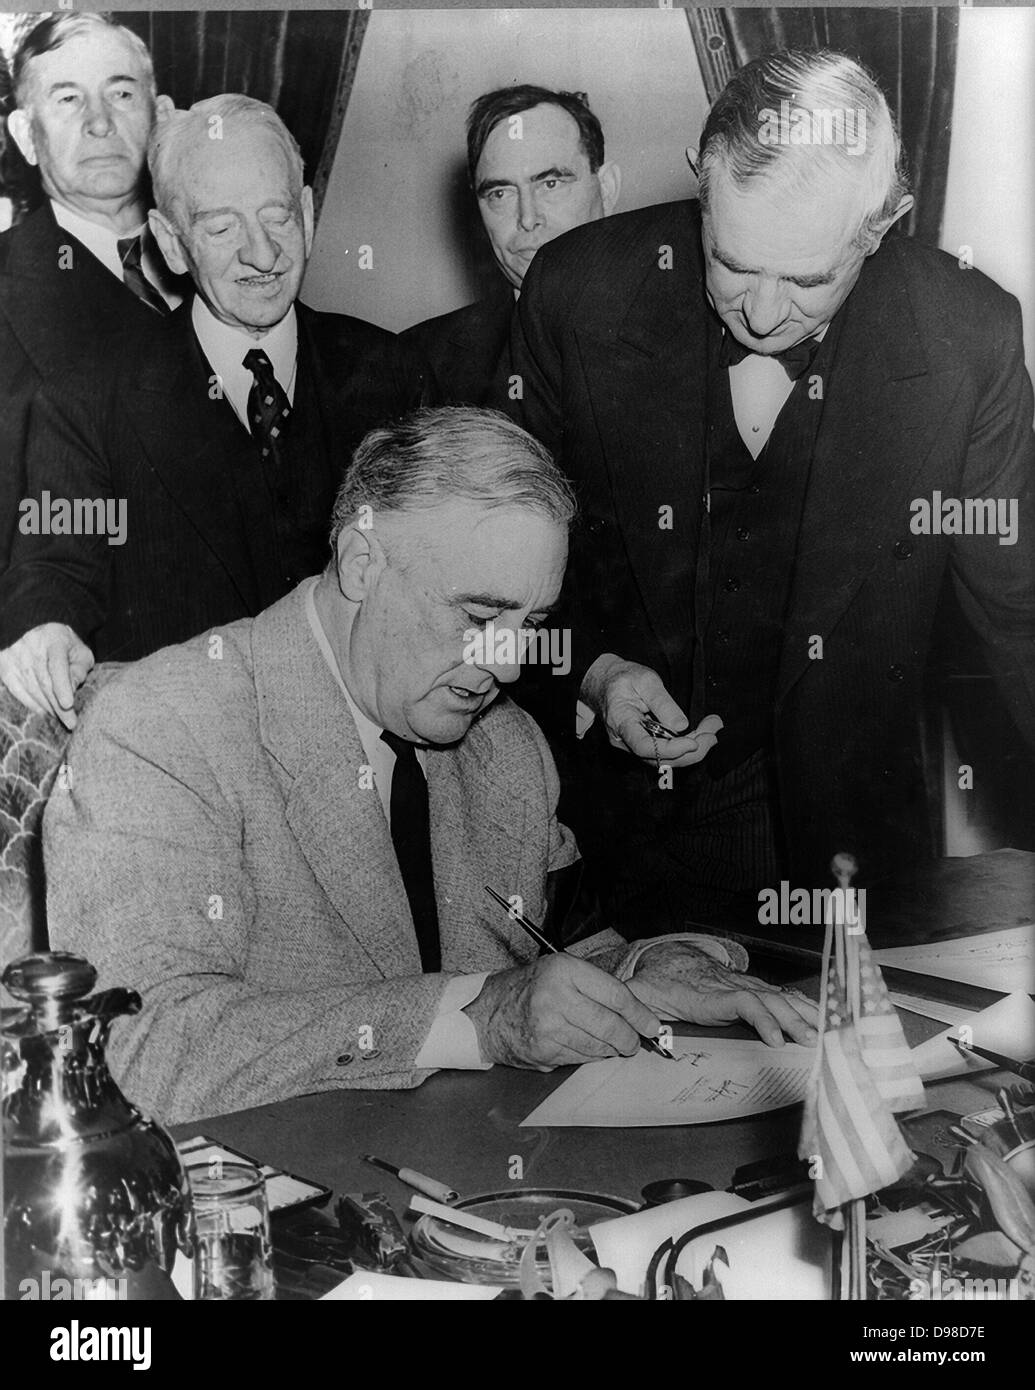 Franklin Delano Roosevelt (1882-1945) 32nd President of the United States of America 1933-1945, signing the declaration of war against Germany, 11 December 1941. Stock Photo